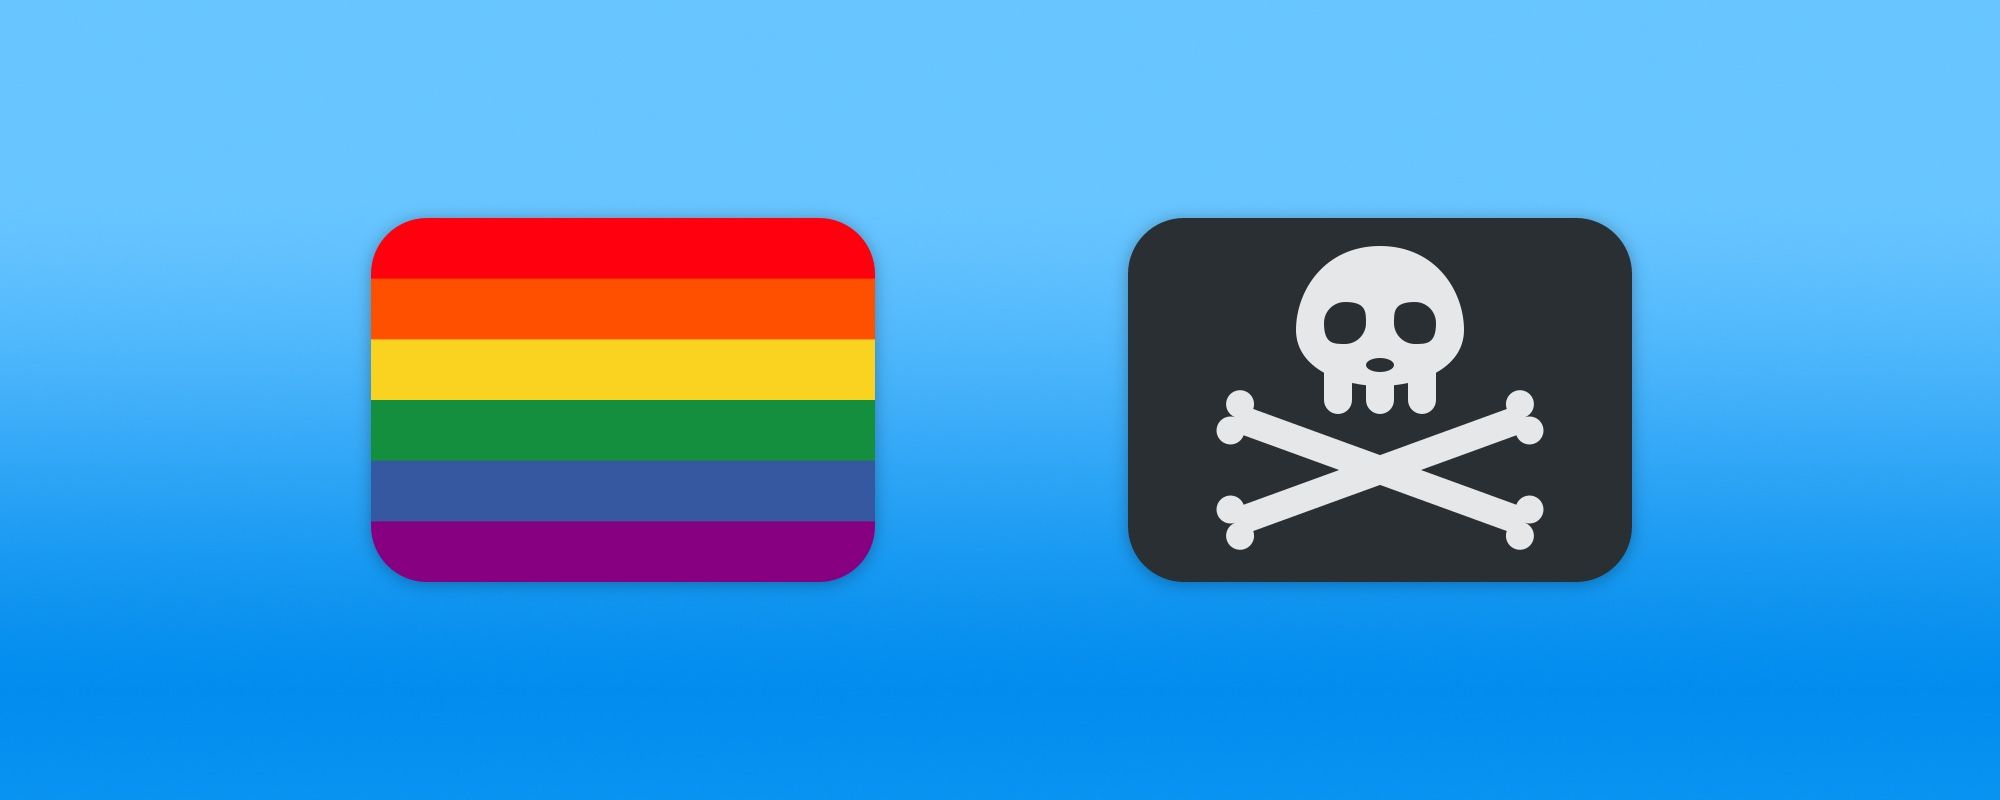 Rainbow and Pirate Flag Emojis Arrive on Twitter